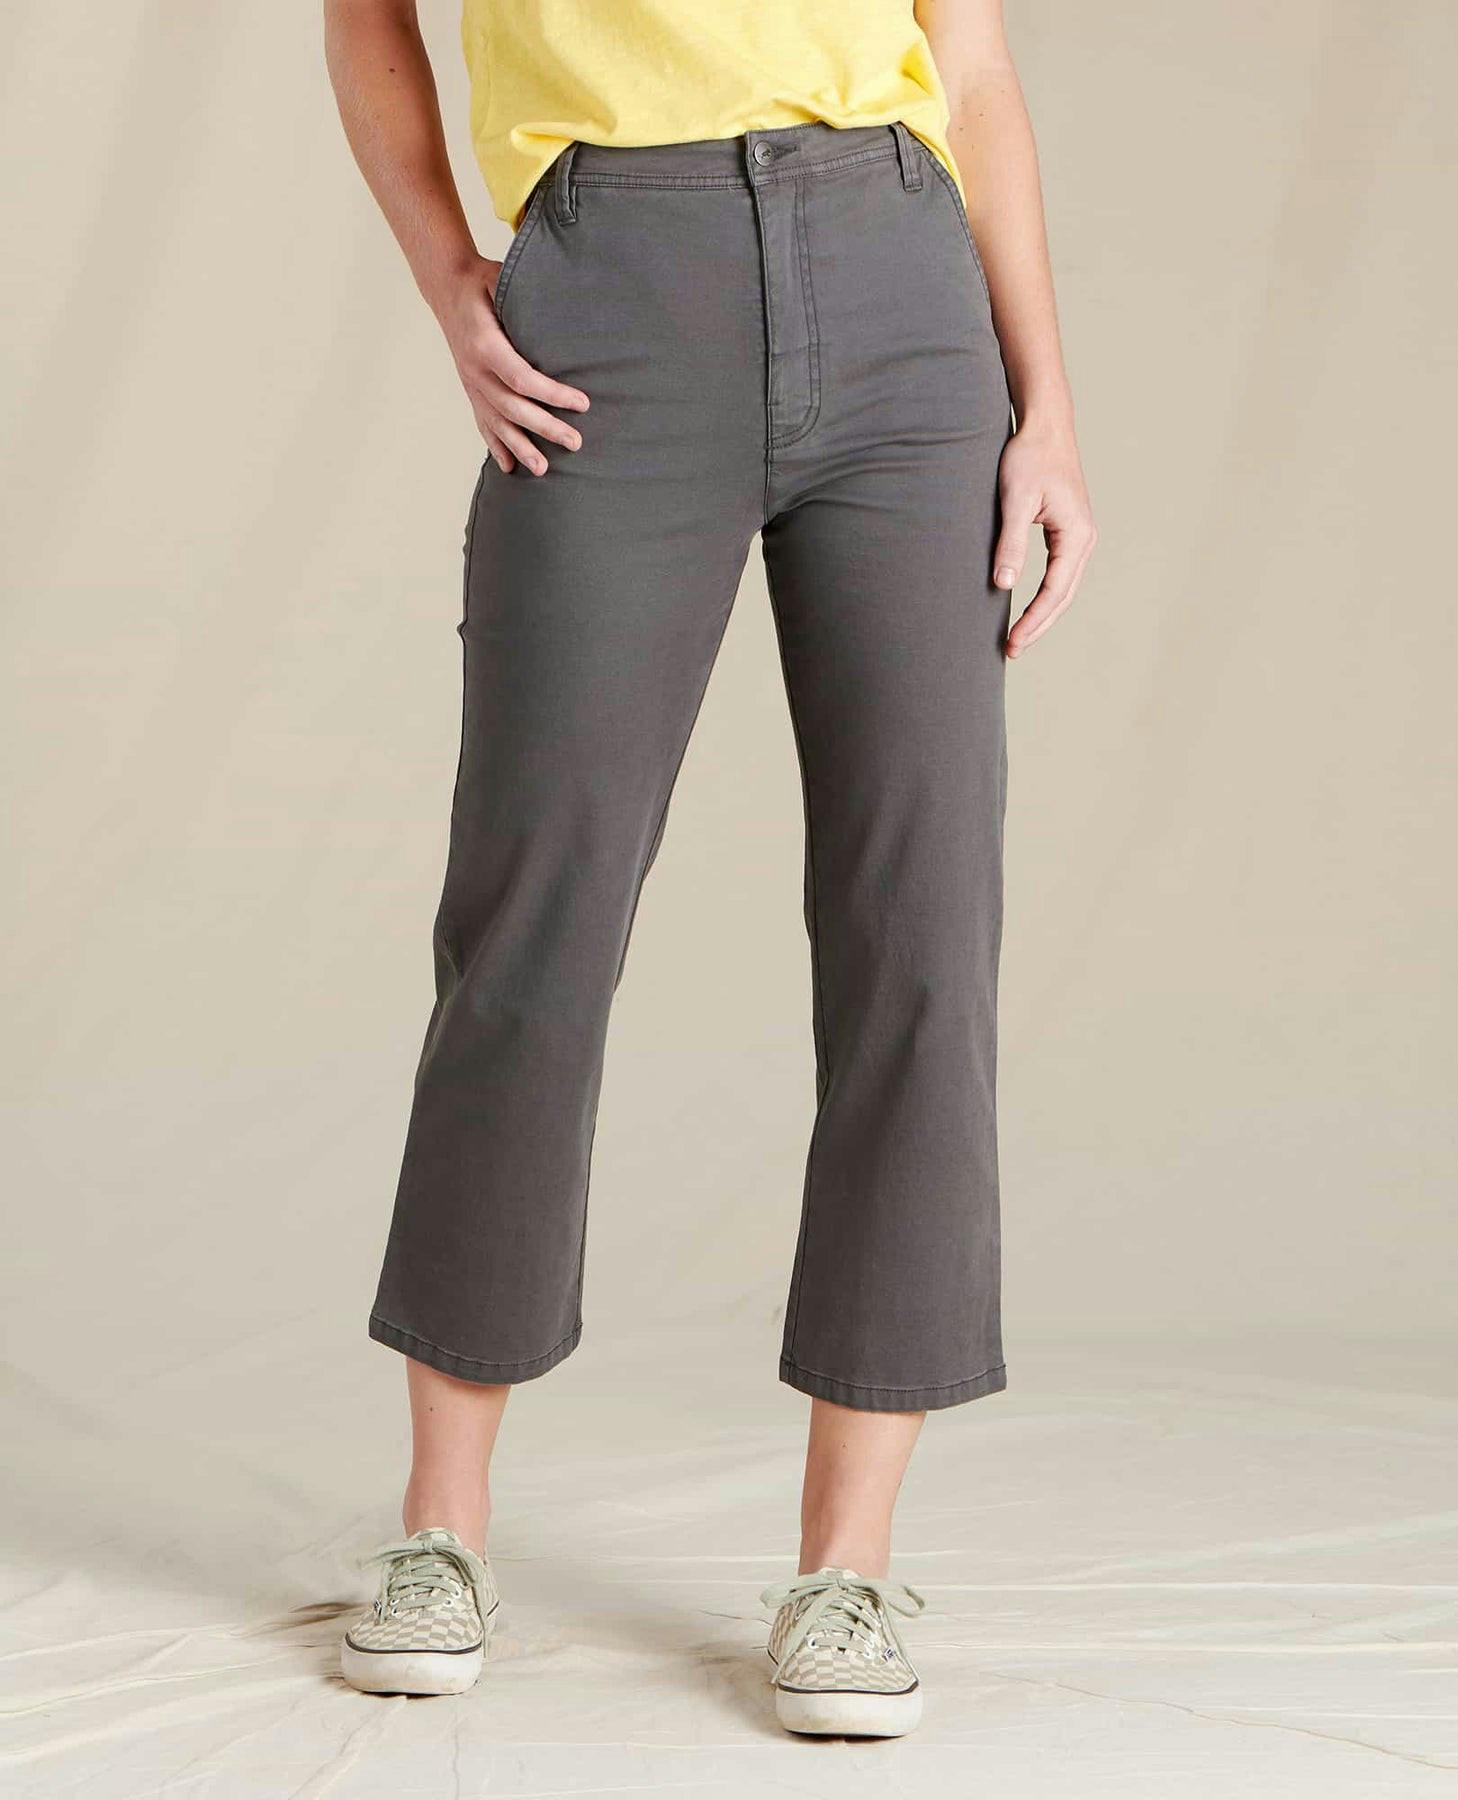 Toad and Co - Earthworks High Rise Pant - 4 Soot